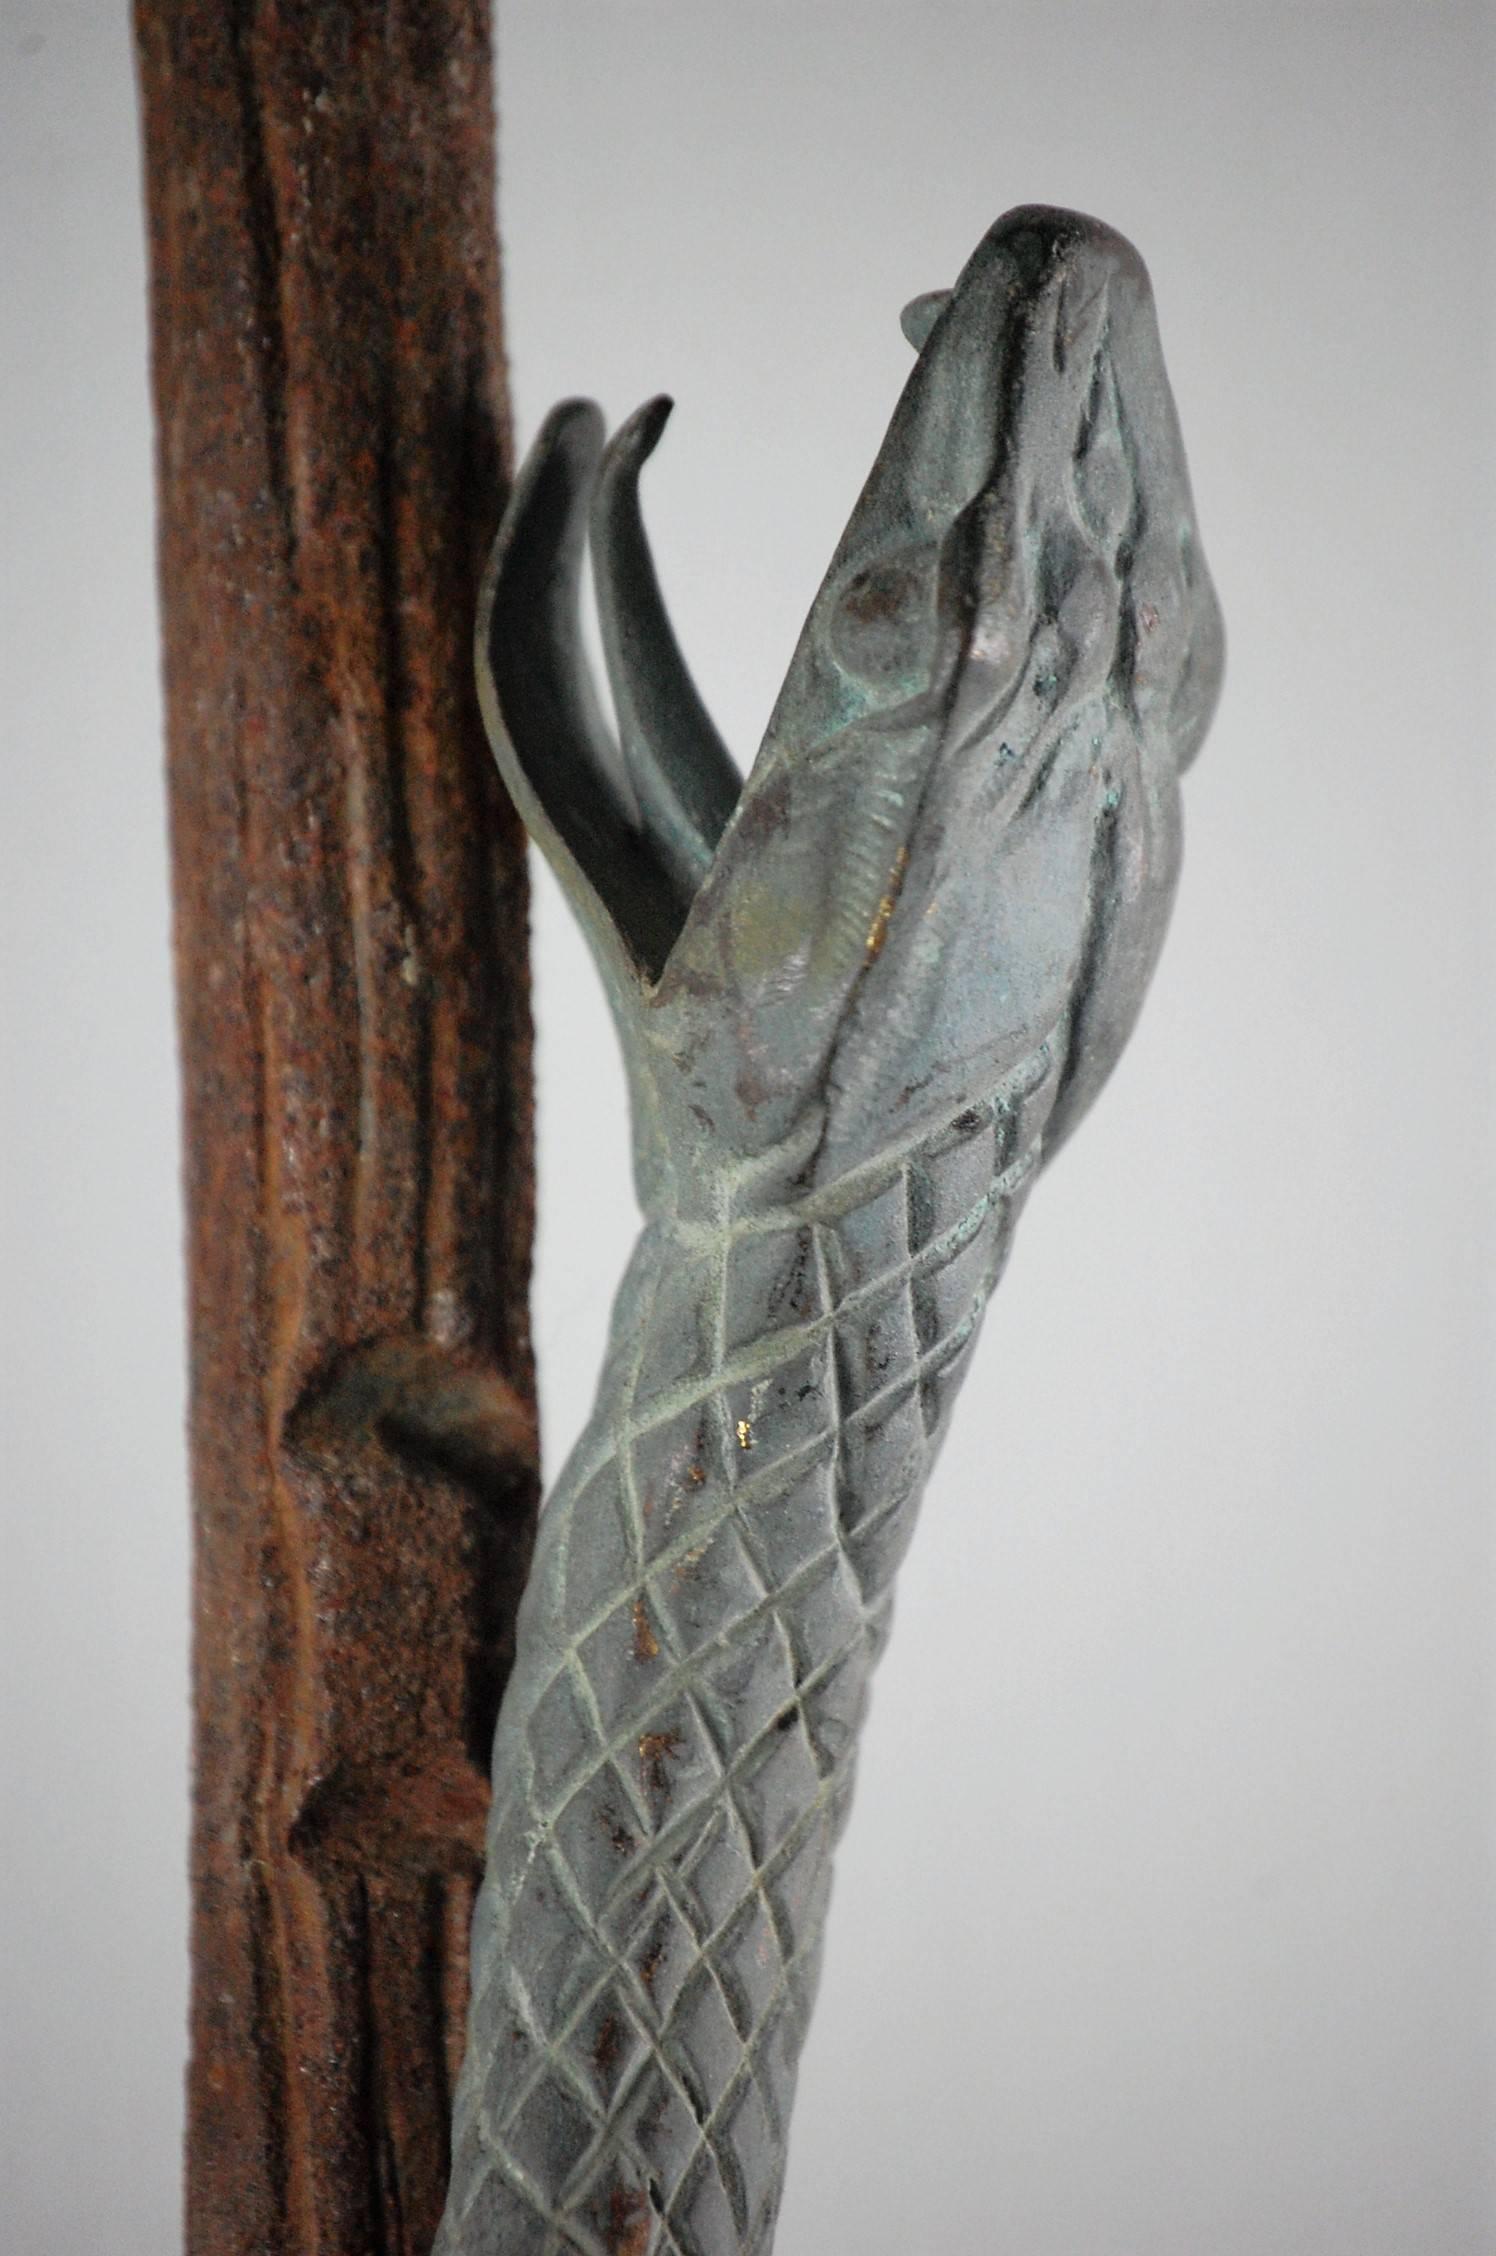 French wrought iron and bronze Apothecary trade sign. The serpent is bronze with heavy Verdigris and the flower adorned rod is wrought iron. We believe this sign to be a depiction of the rod of Aslepius, which has always been associated with